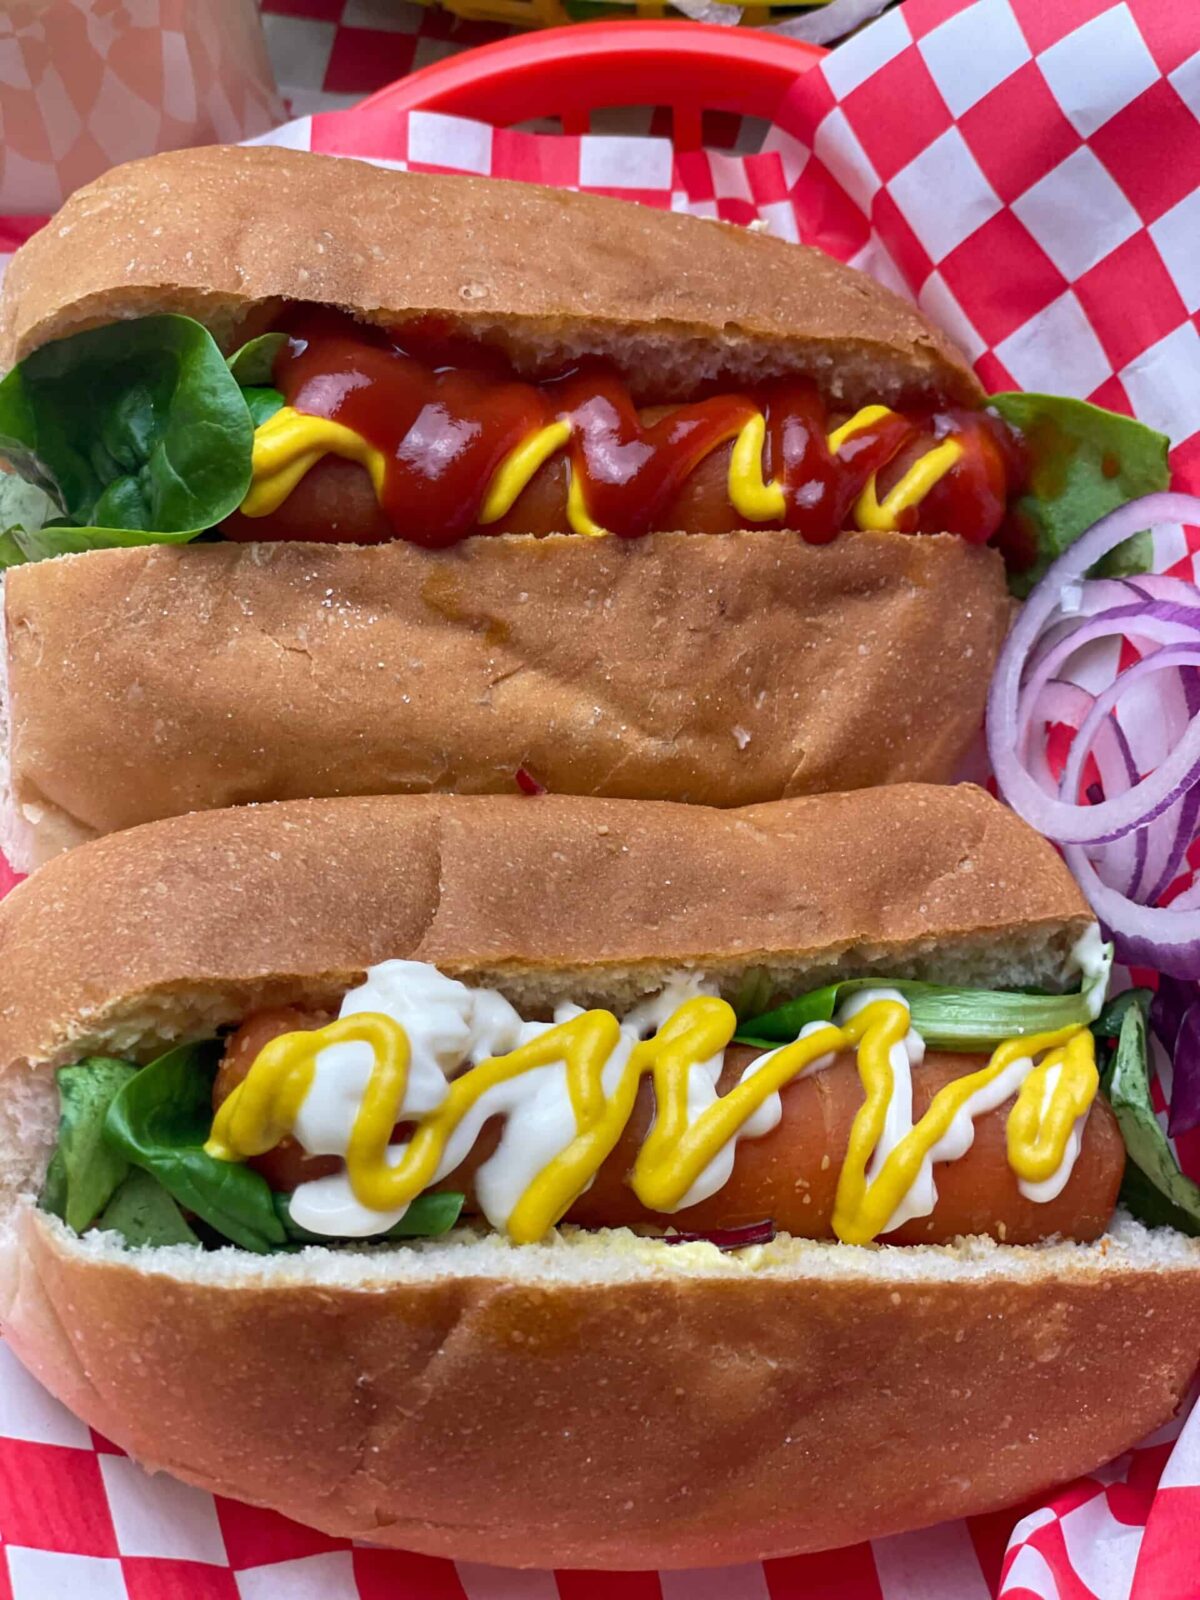 carrot hotdogs in a long bread bun with mustard, ketchup drizzles, and green salad, with a red check mat underneath.